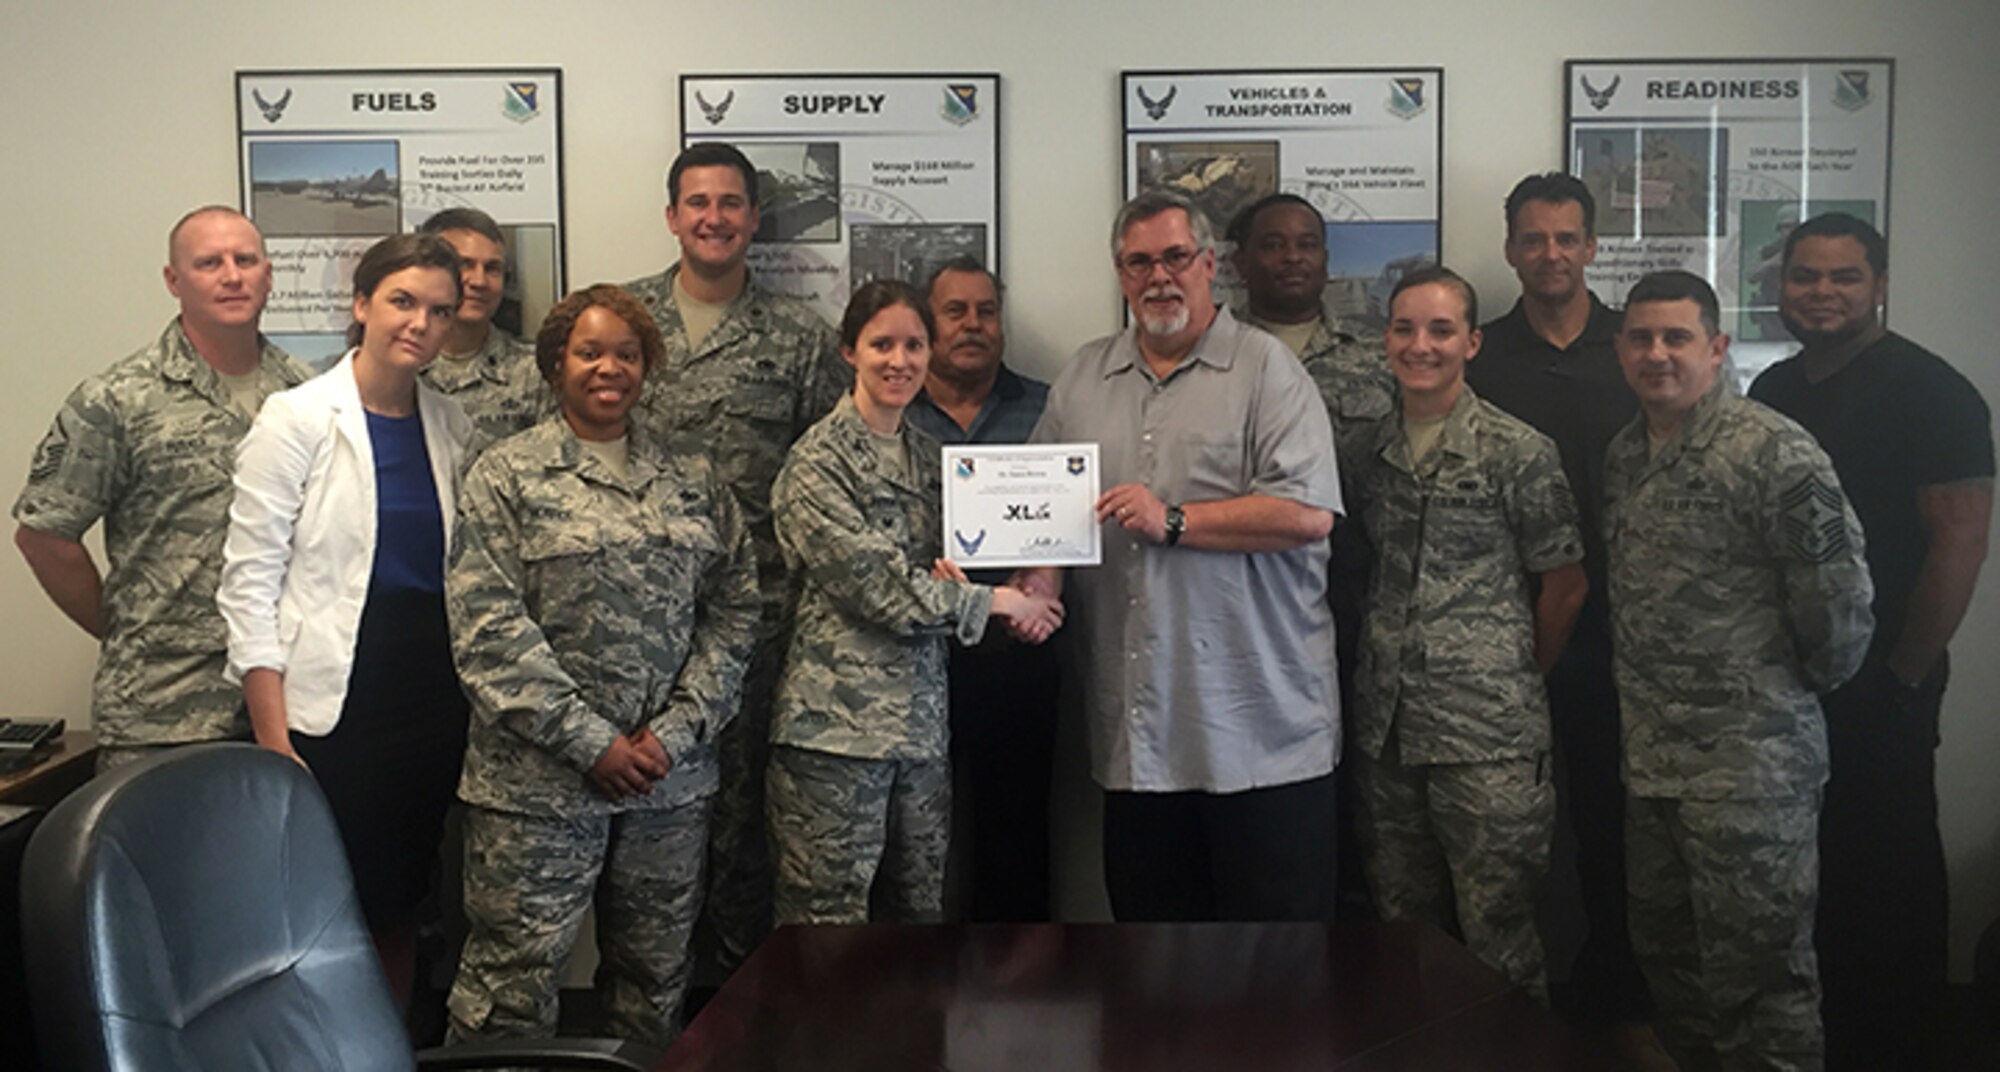 James Brown, front right, 47th Flying Training installation deployment officer, accepts the “XLer of the Week” award from Col. Michelle Pryor, front left, 47th Flying Training Wing commander, here, July 20, 2016. The XLer is a weekly award chosen by wing leadership and is presented to those who consistently make outstanding contributions to their unit and Laughlin. (Courtesy photo)